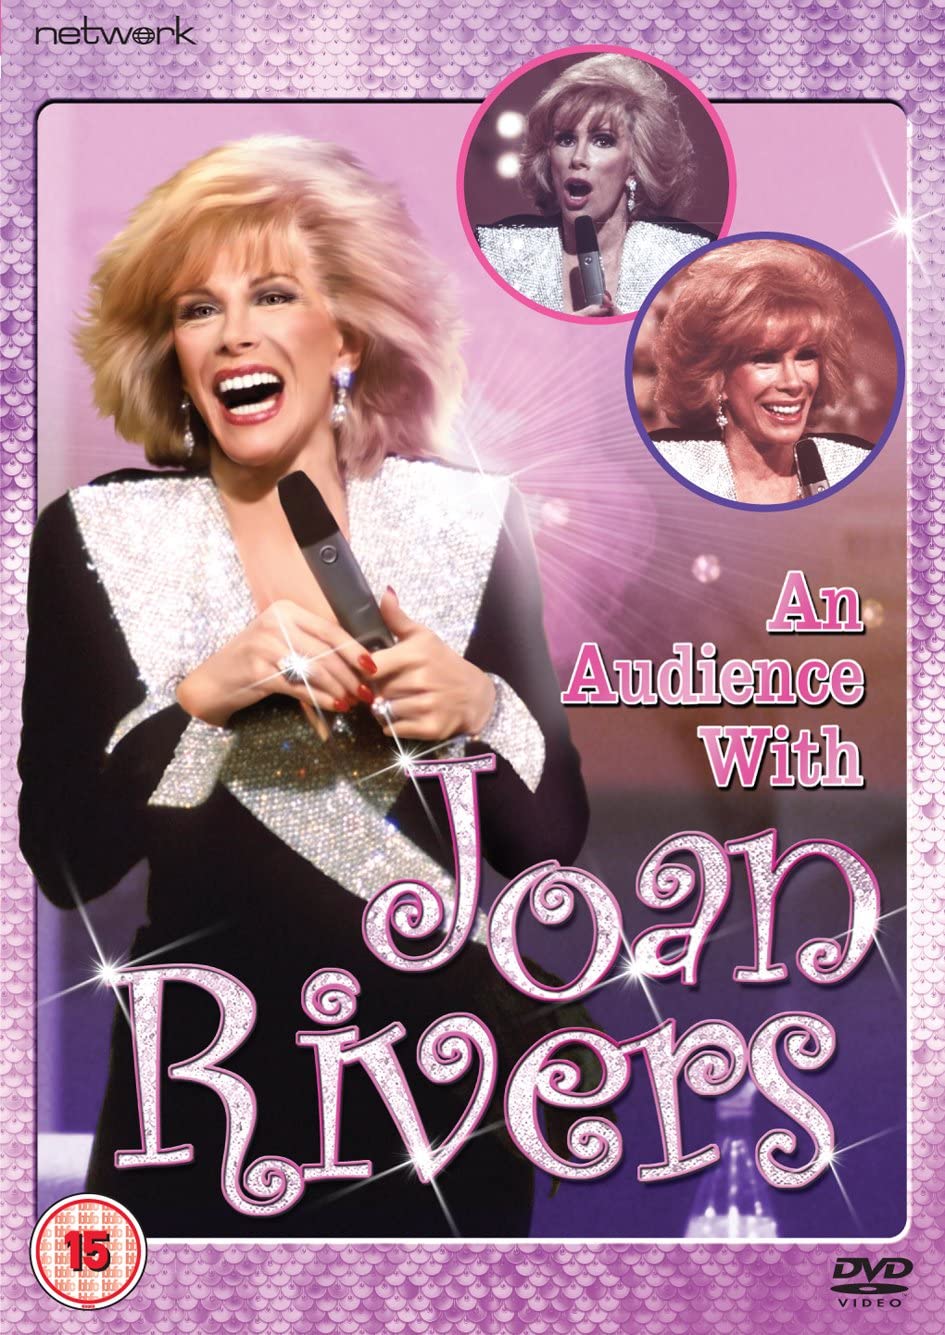 Joan Rivers - An Audience With [1984] [DVD]